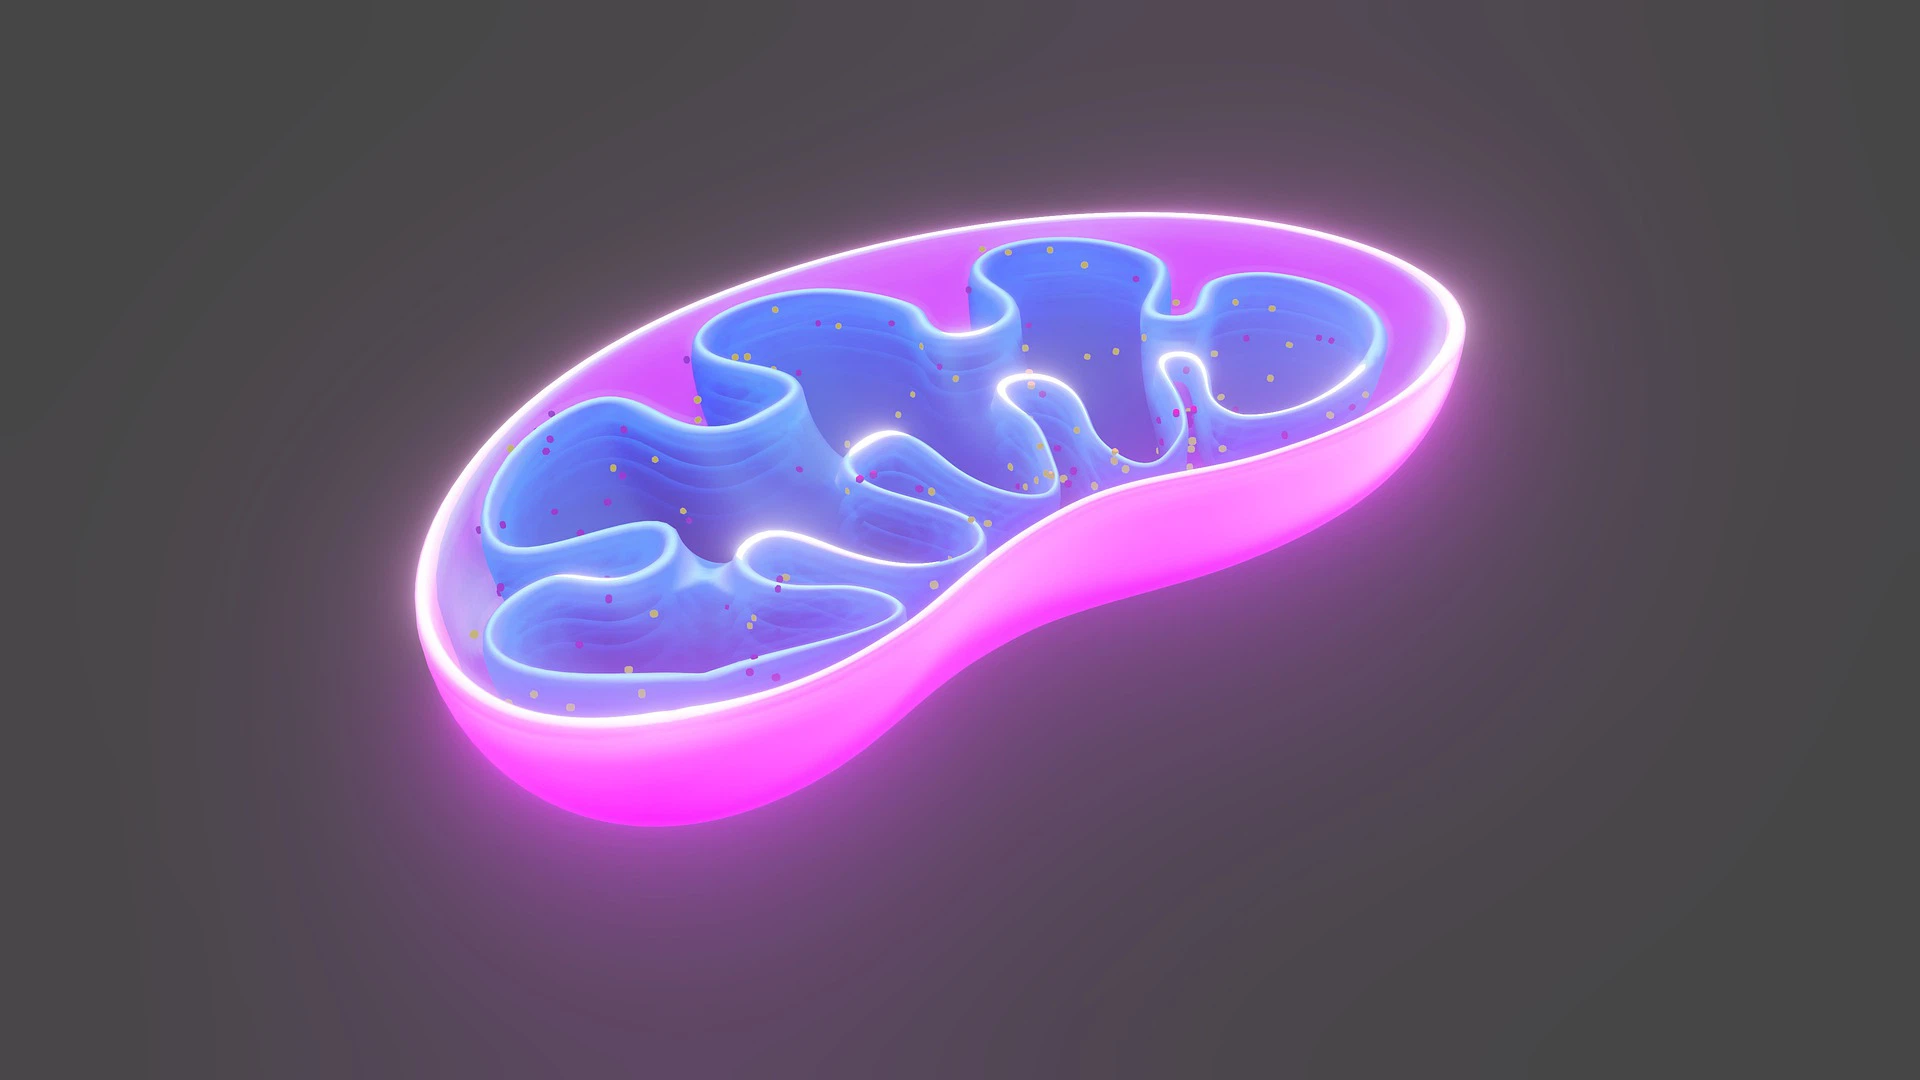 NMN found to improve mitochondrial function in age-related diseases